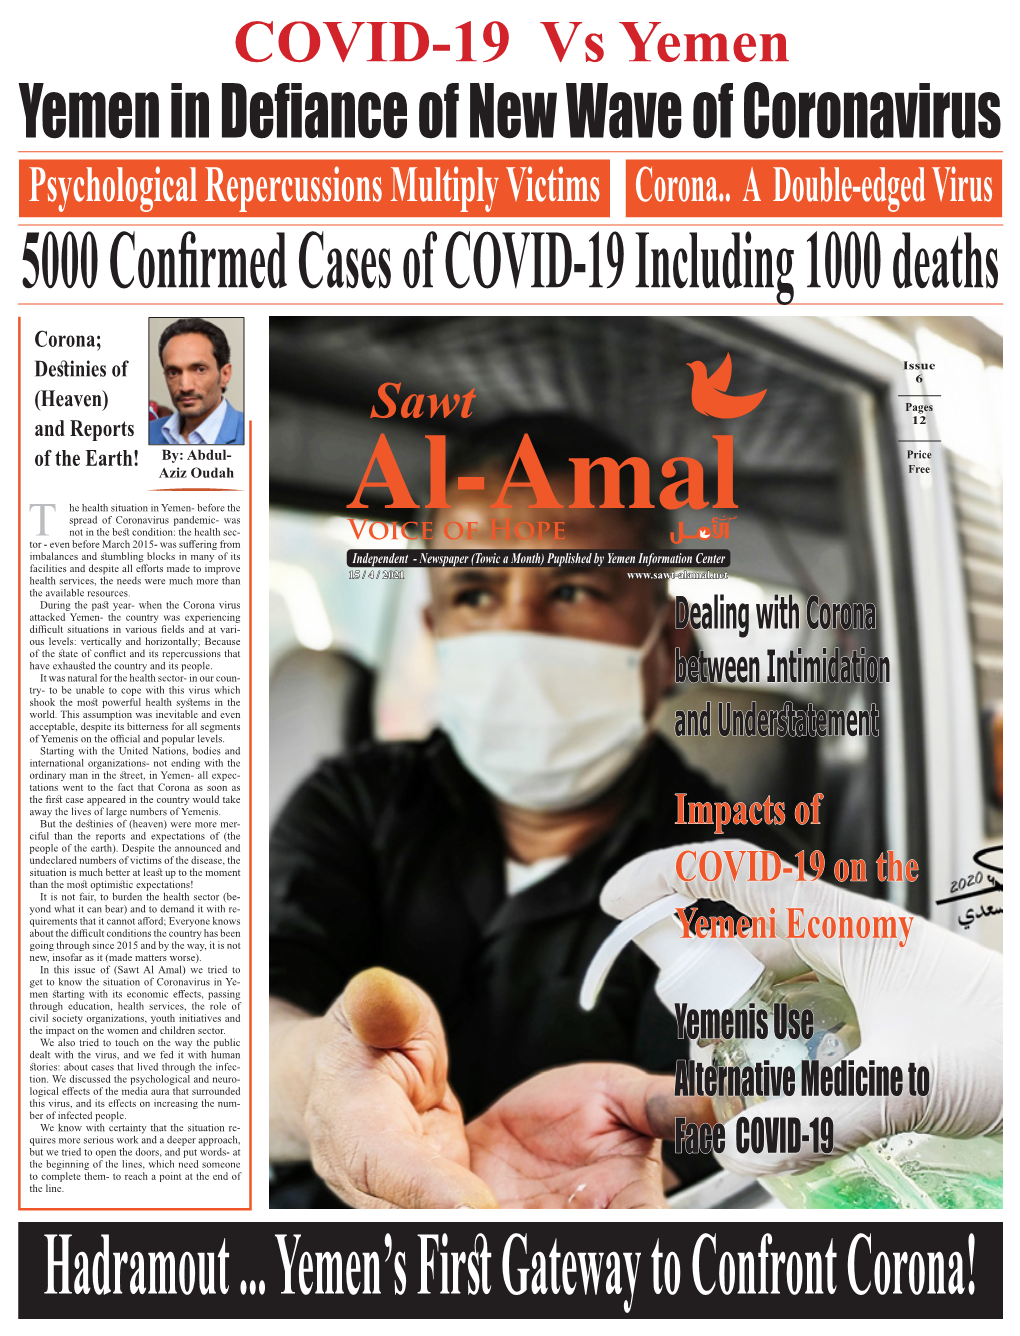 5000 Confirmed Cases of COVID-19 Including 1000 Deaths Corona; Issue Destinies of 6